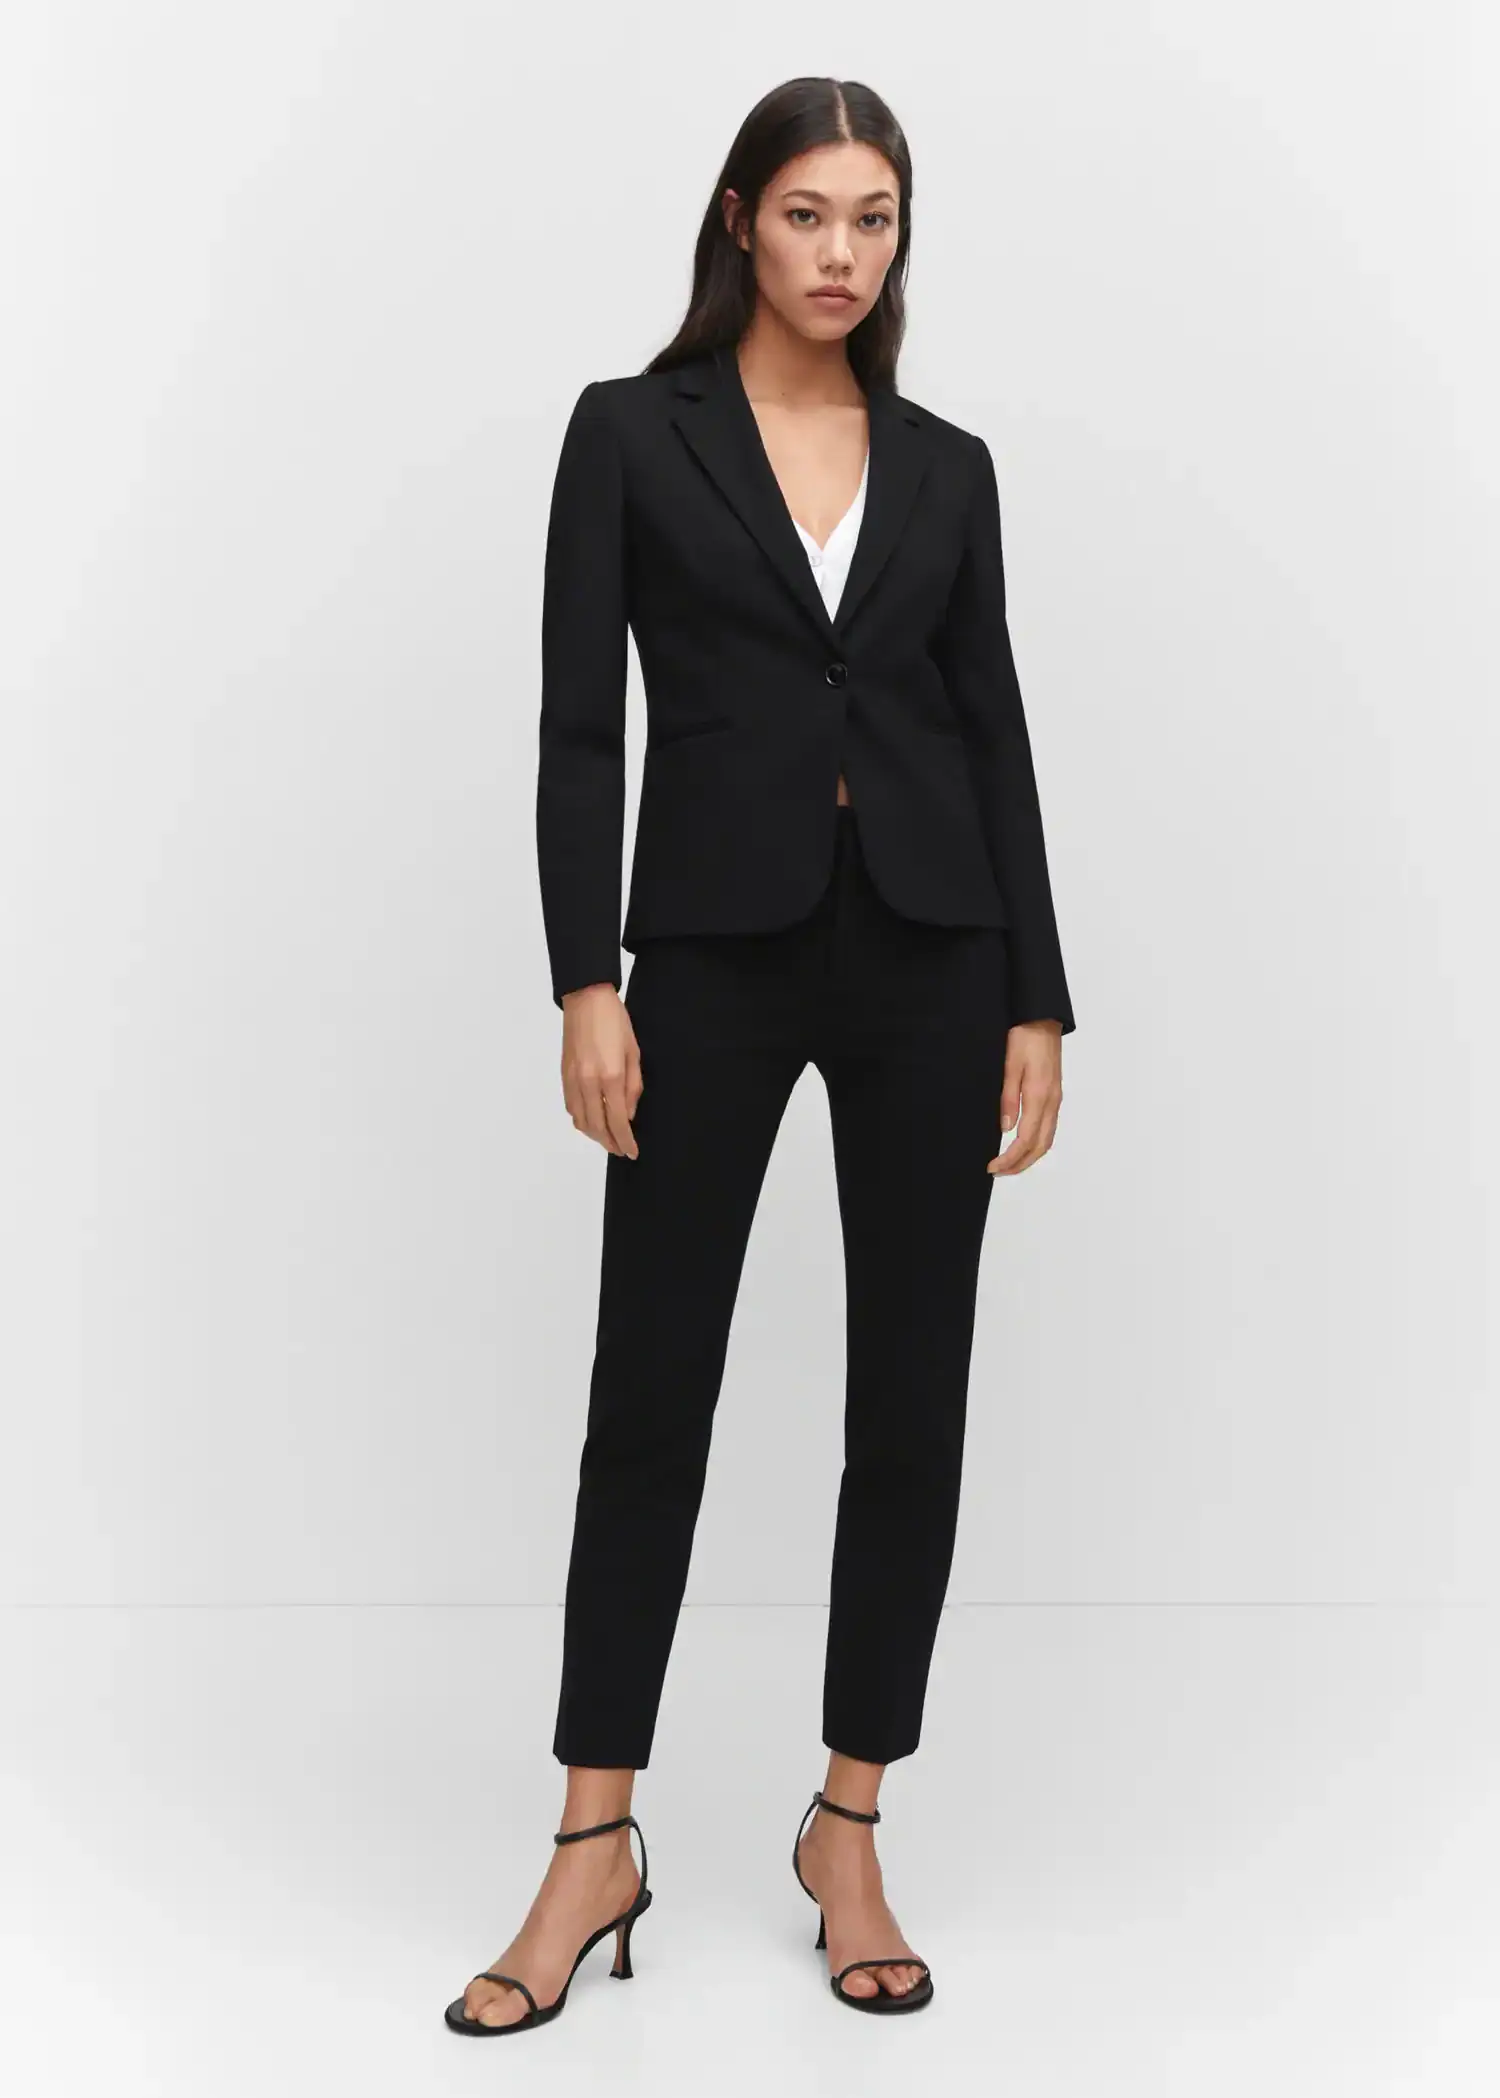 Mango Fitted blazer with blunt stitching. a woman wearing a black suit standing in front of a white wall. 